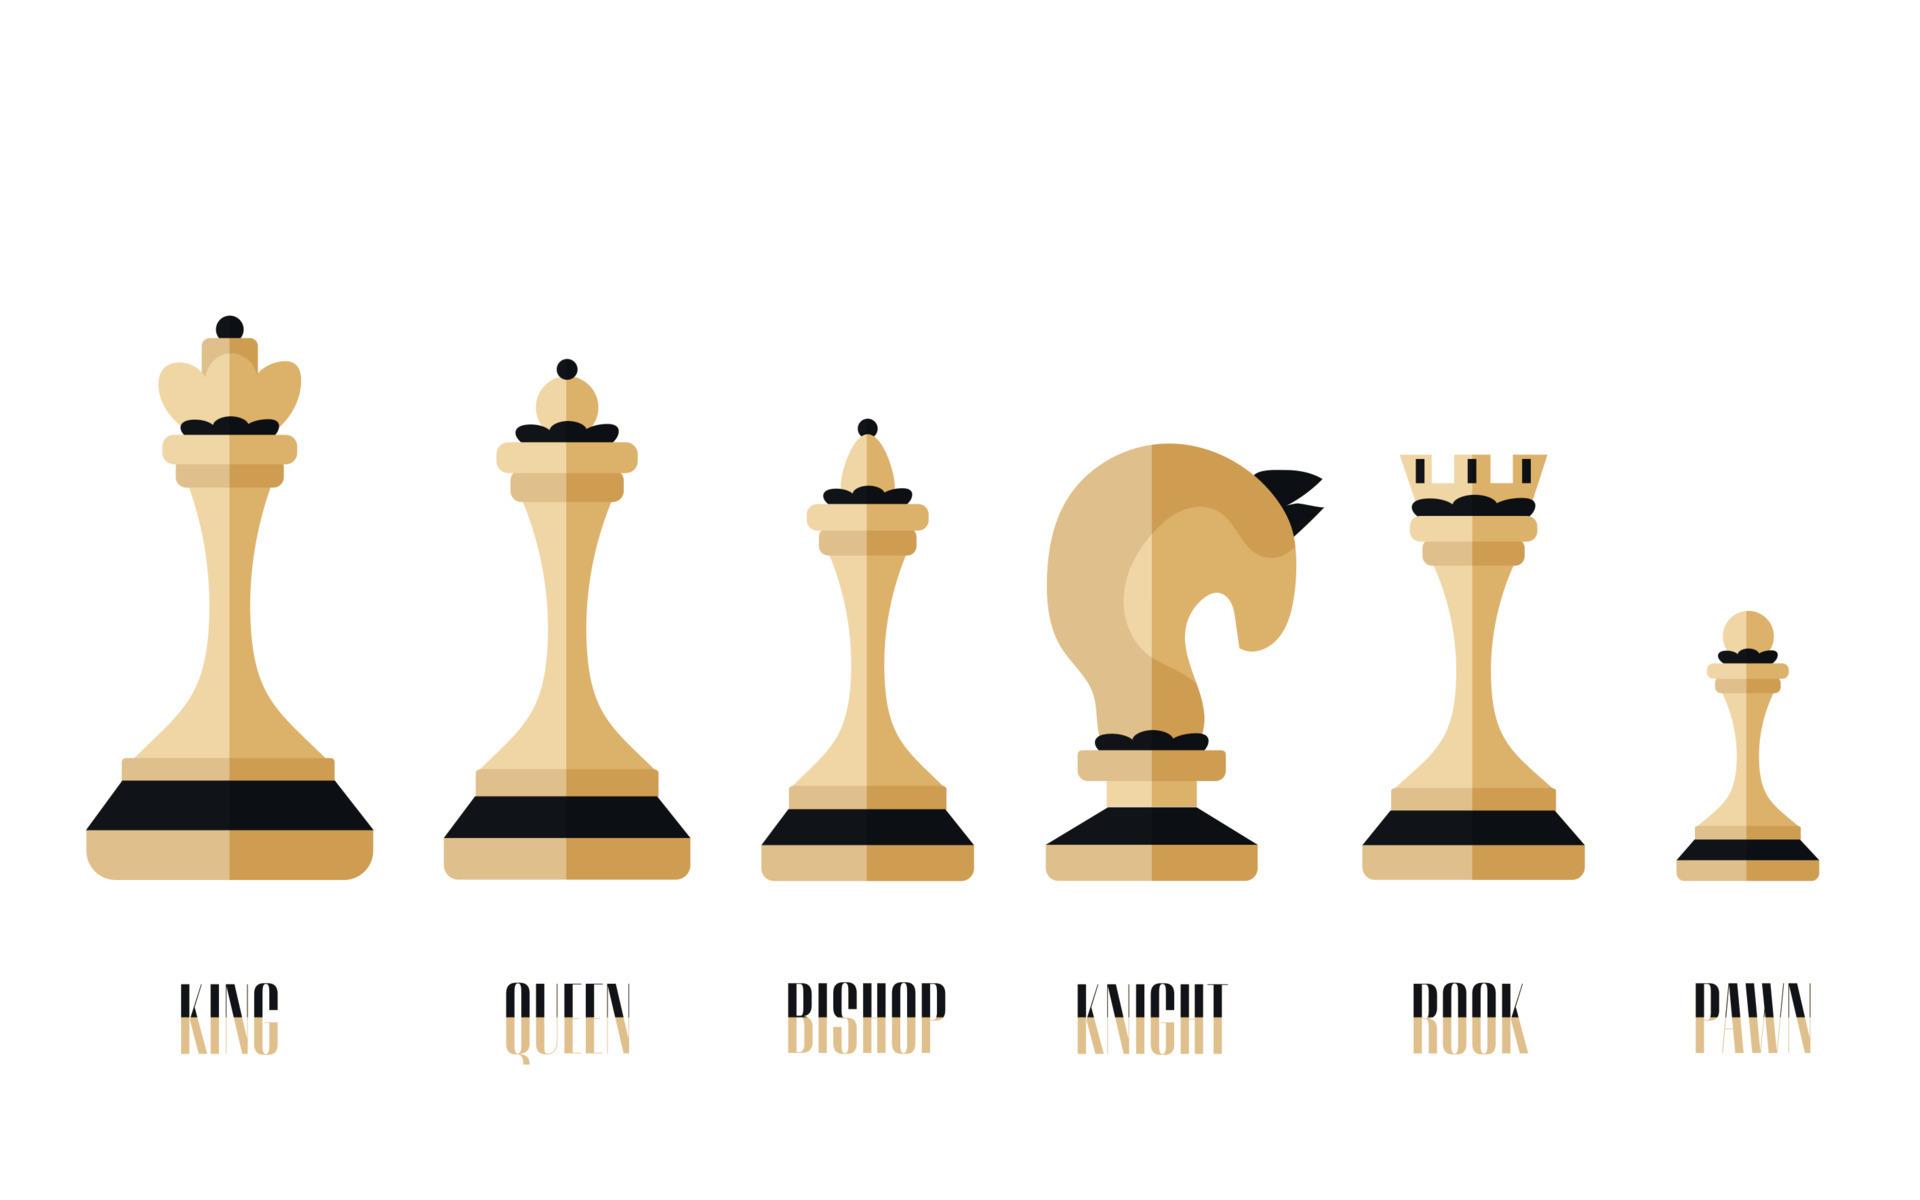 able-hedgehog44: white chess king, black pawns, topped with cross